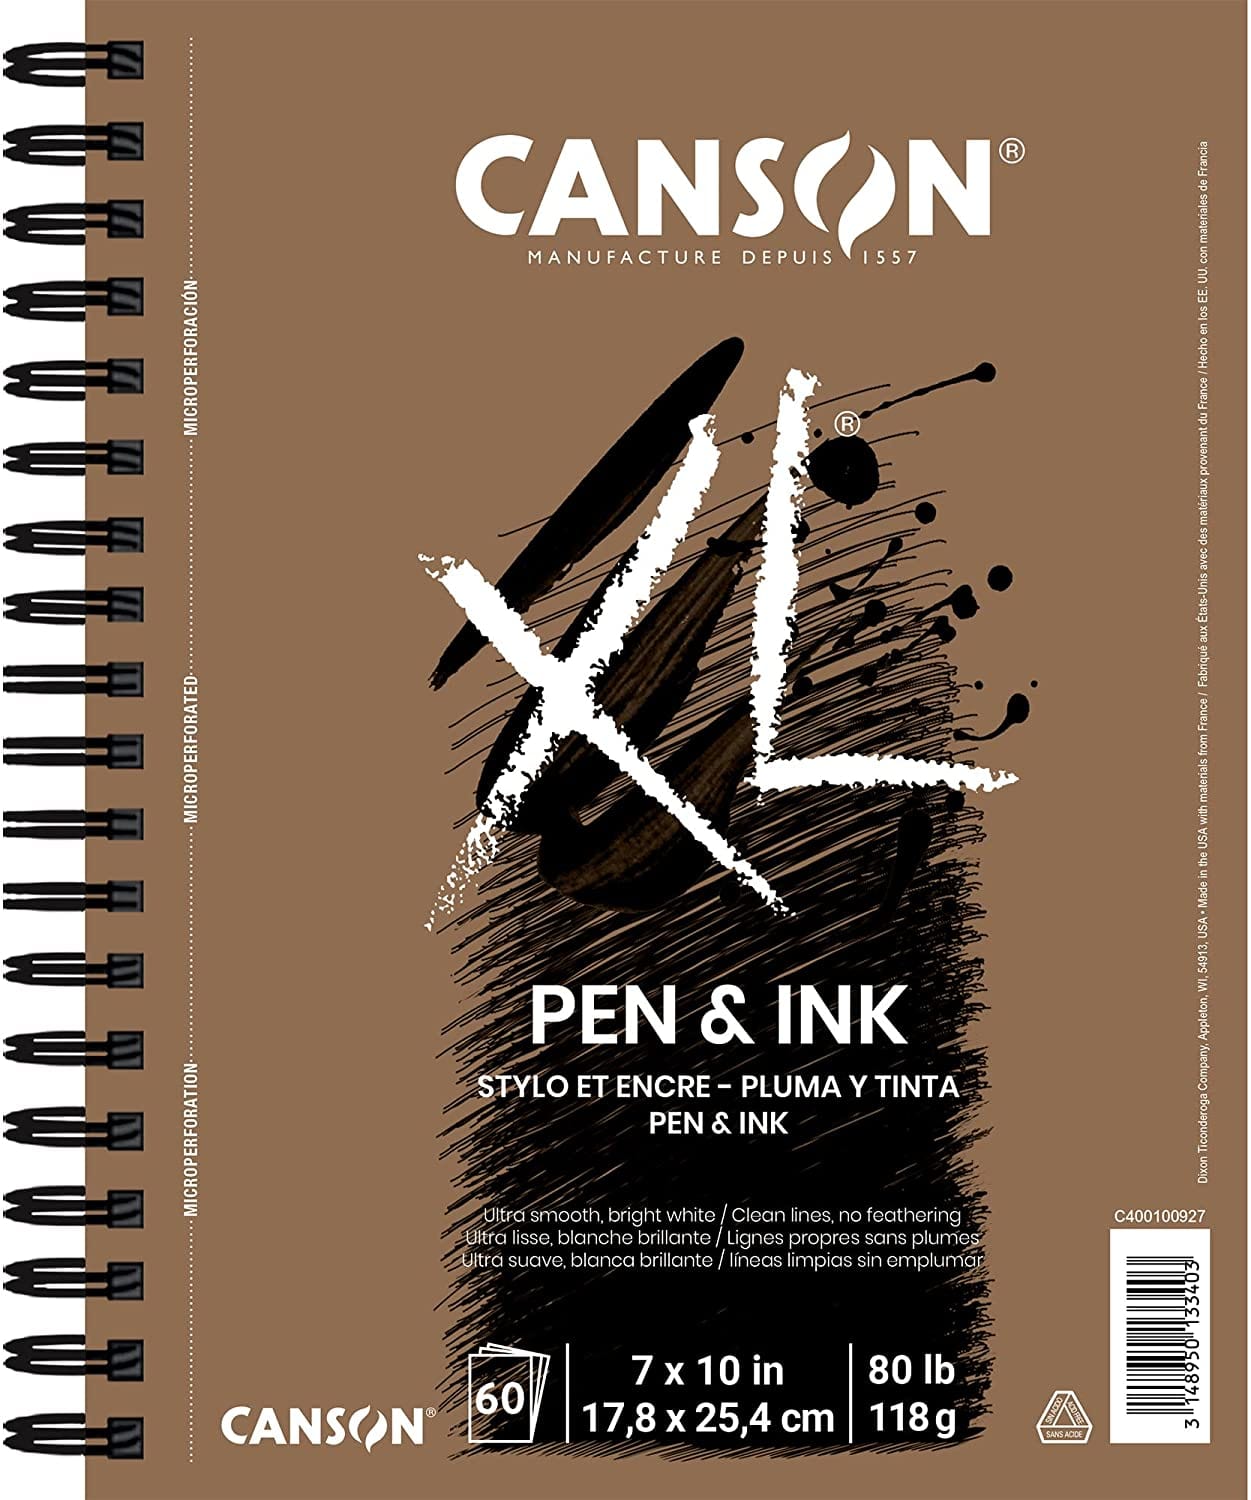 CANSON SKETCHBOOK Canson - XL - Pen & Ink - Coil Bound Soft Cover - 7x10" - Item #C400100927